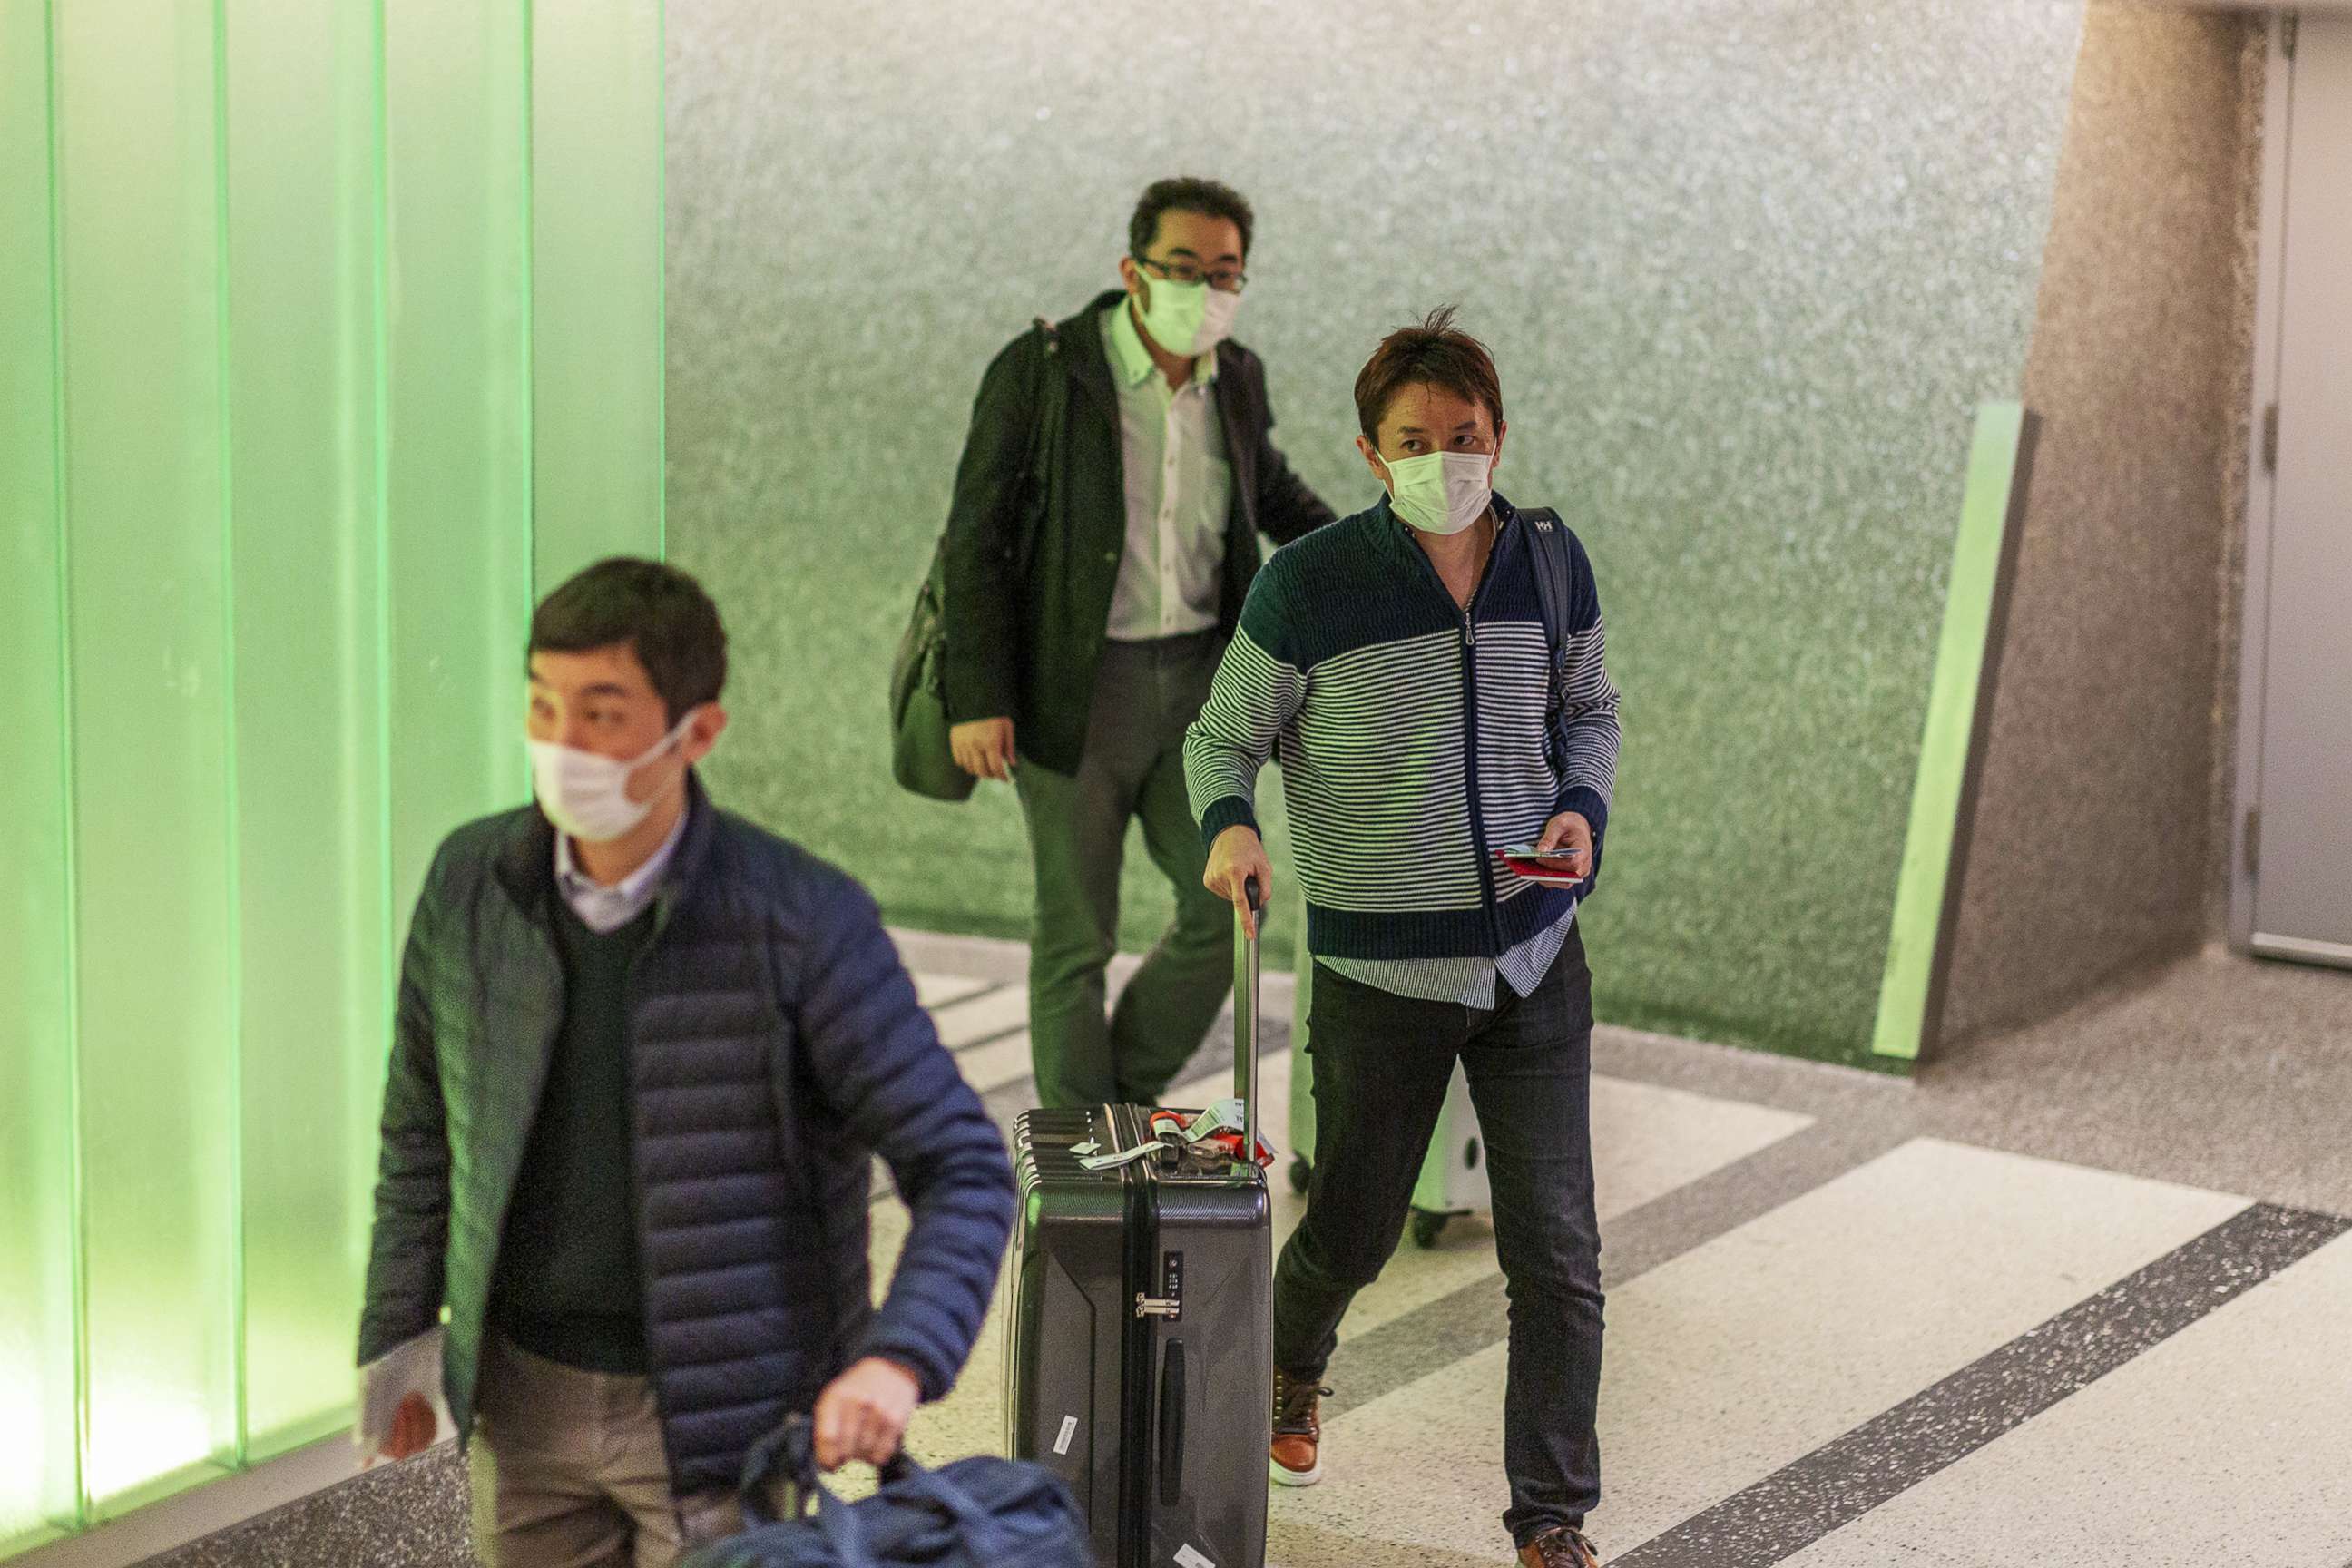 PHOTO: Travelers arrive to LAX Tom Bradley International Terminal wearing medical masks for protection against the novel coronavirus outbreak, Feb. 2, 2020 in Los Angeles.